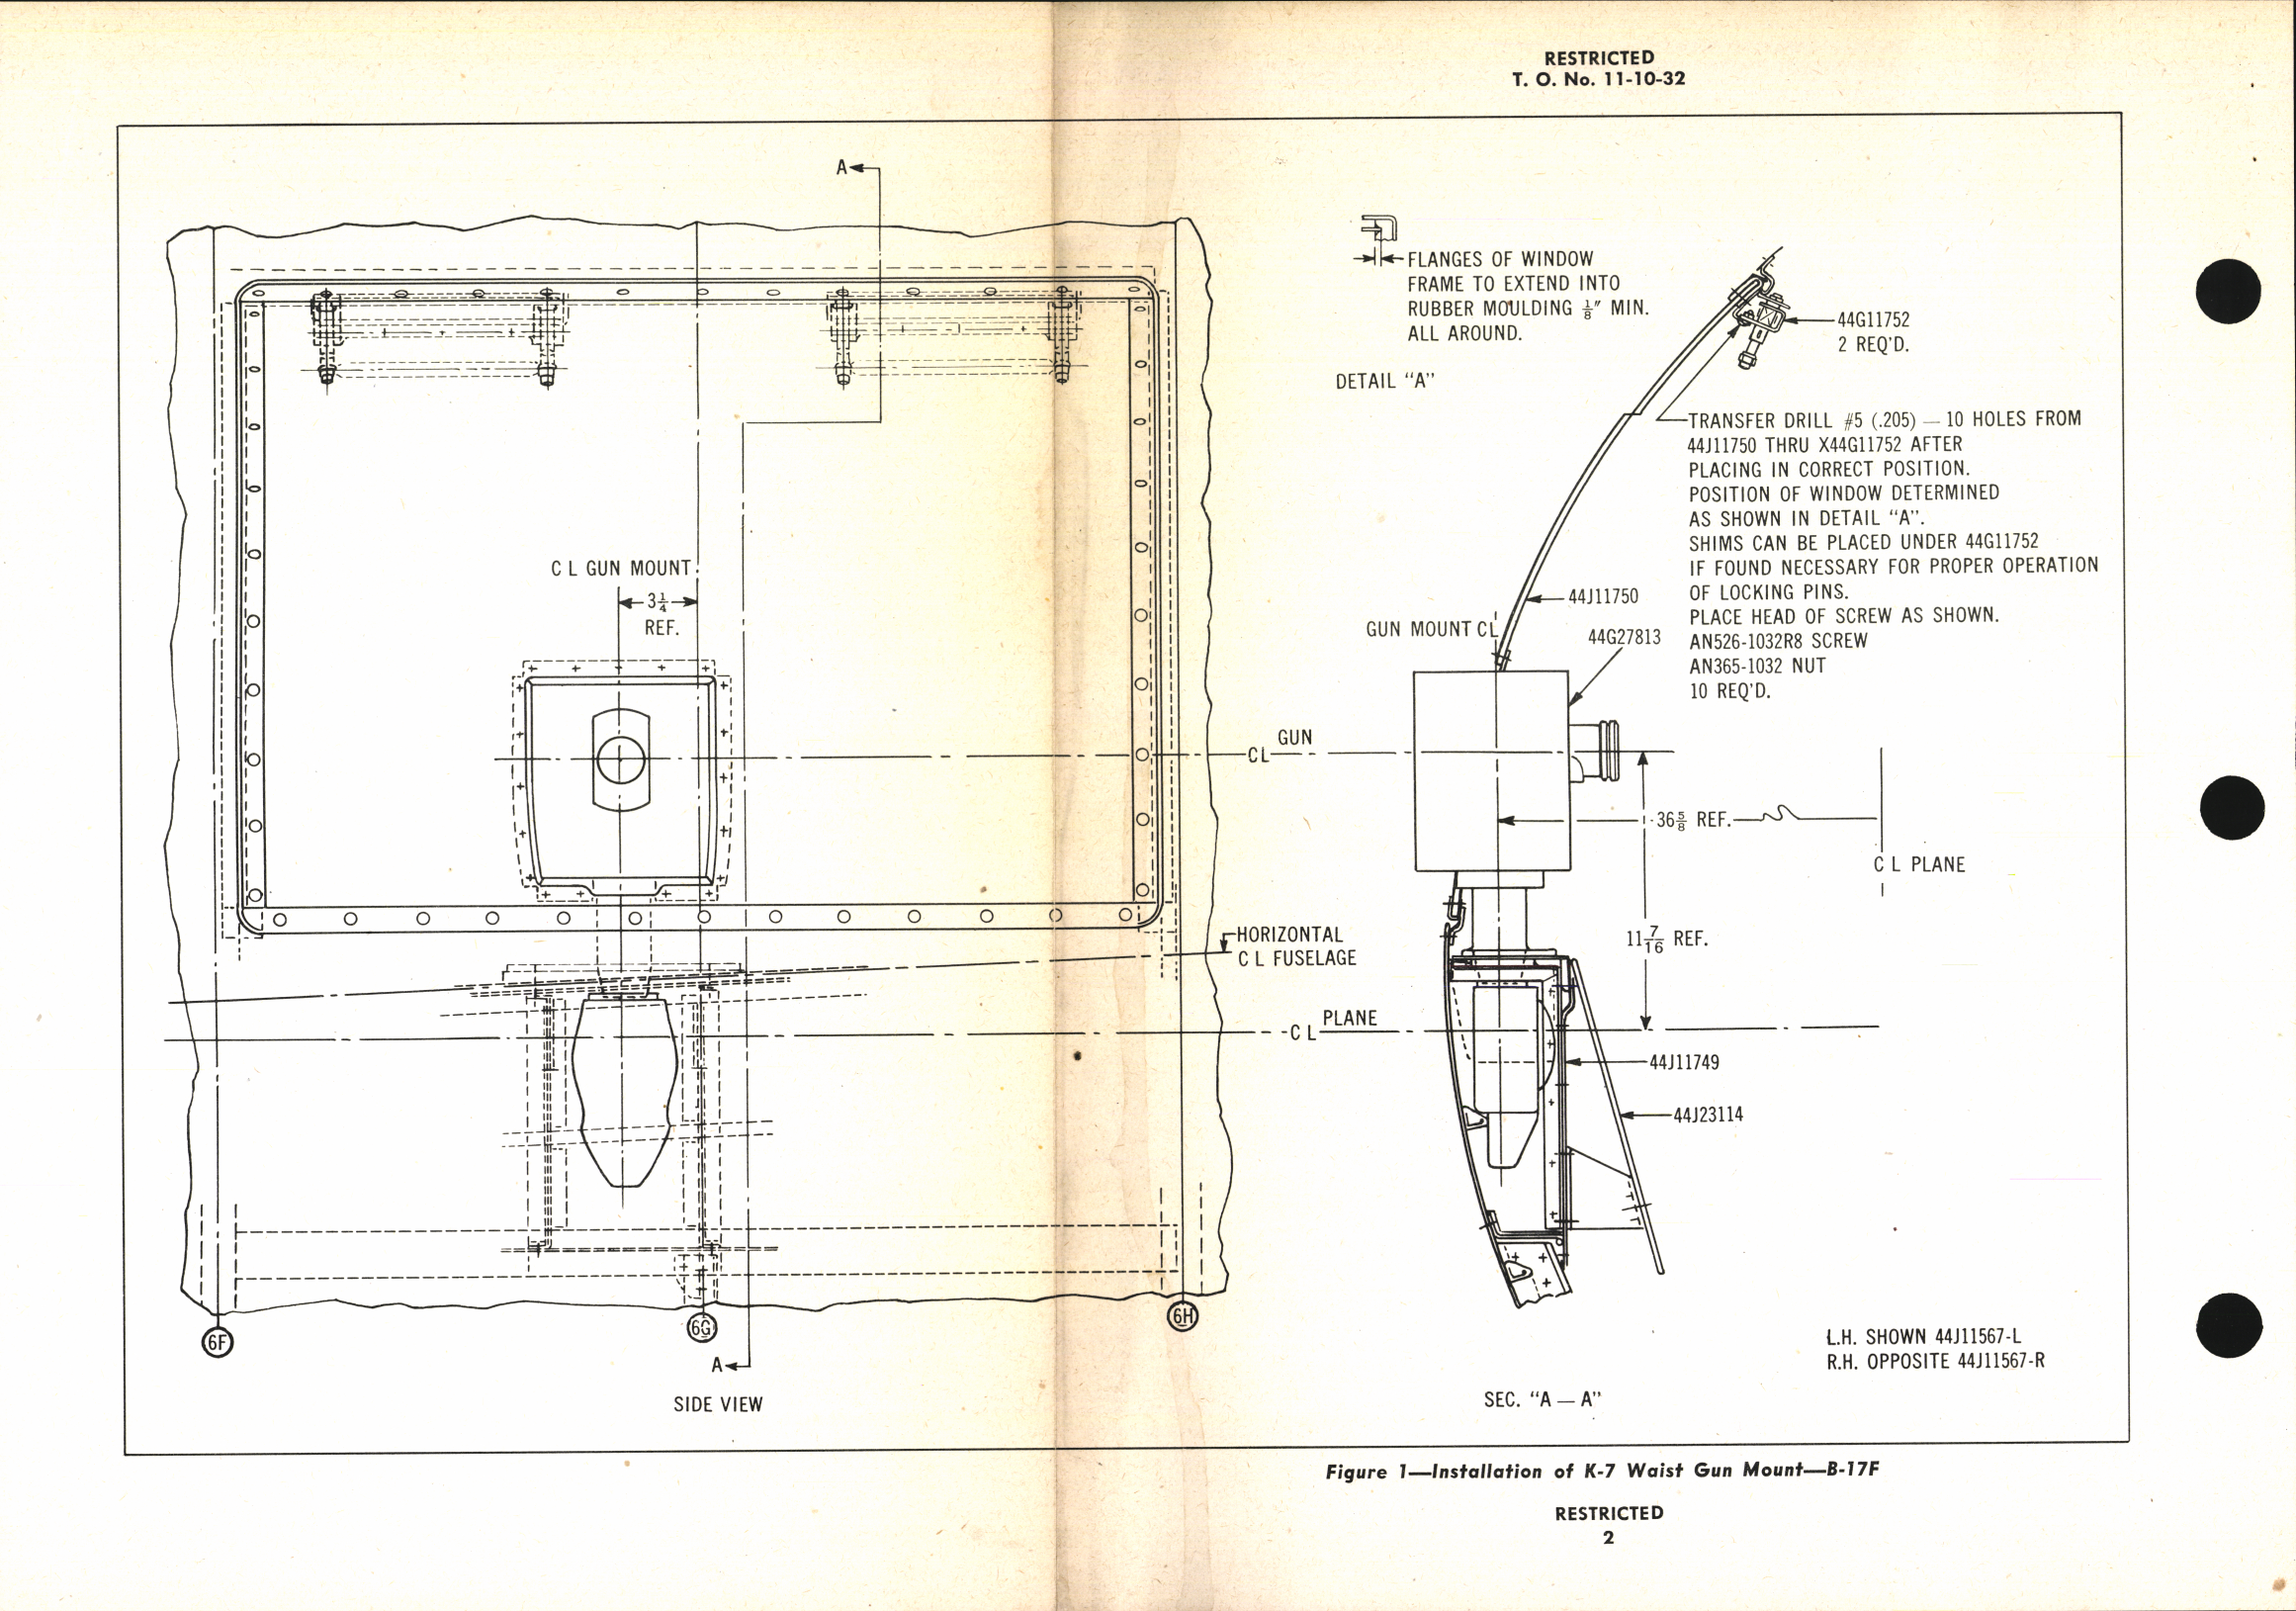 Sample page 6 from AirCorps Library document: Handbook of Instructions for the Installation of Type K-7 Gun Mount